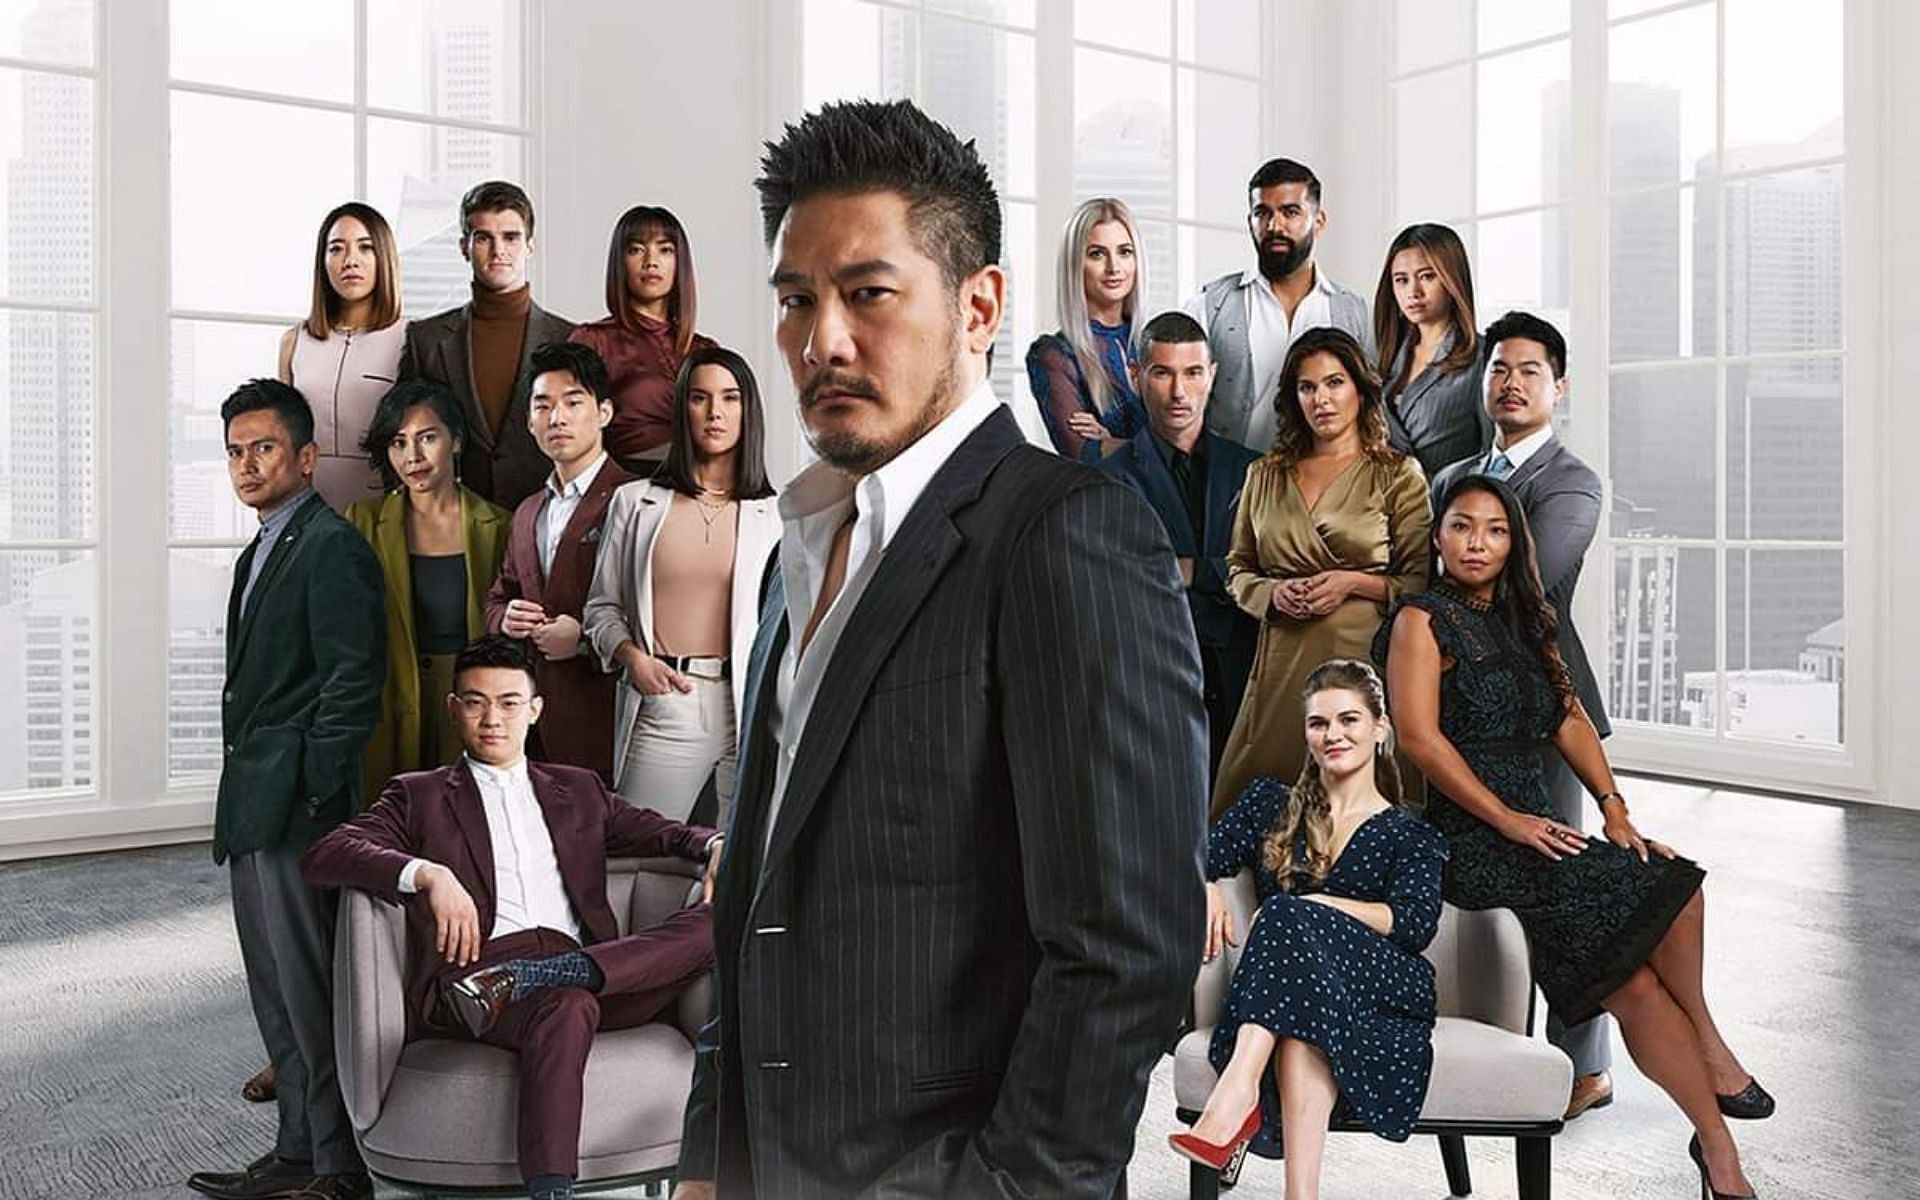 The Apprentice: ONE Championship edition airs on Netflix. [Photo: Chatri Sityodtong on Instagram]